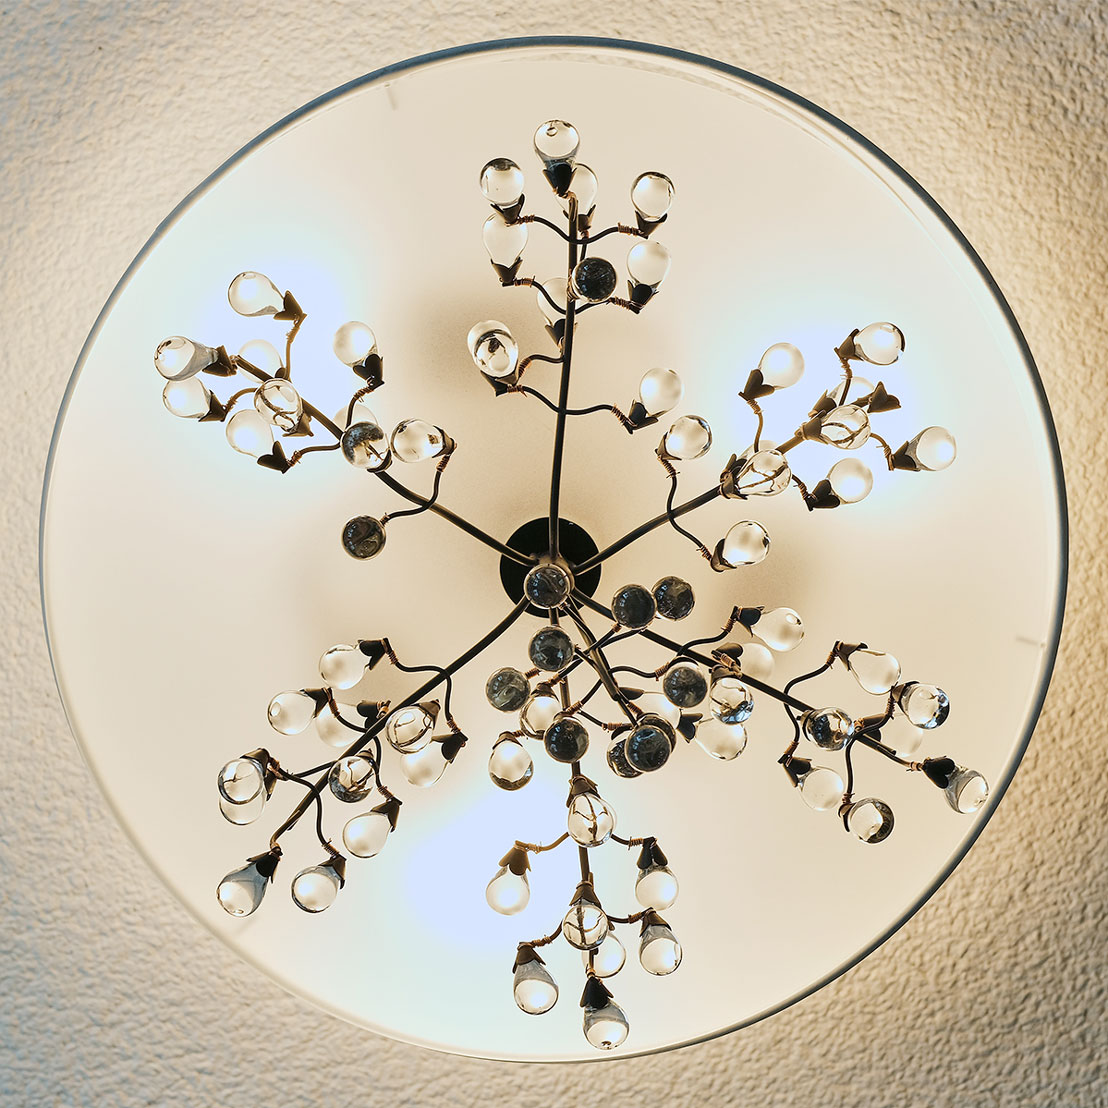 decorative chandelier hung on ceiling